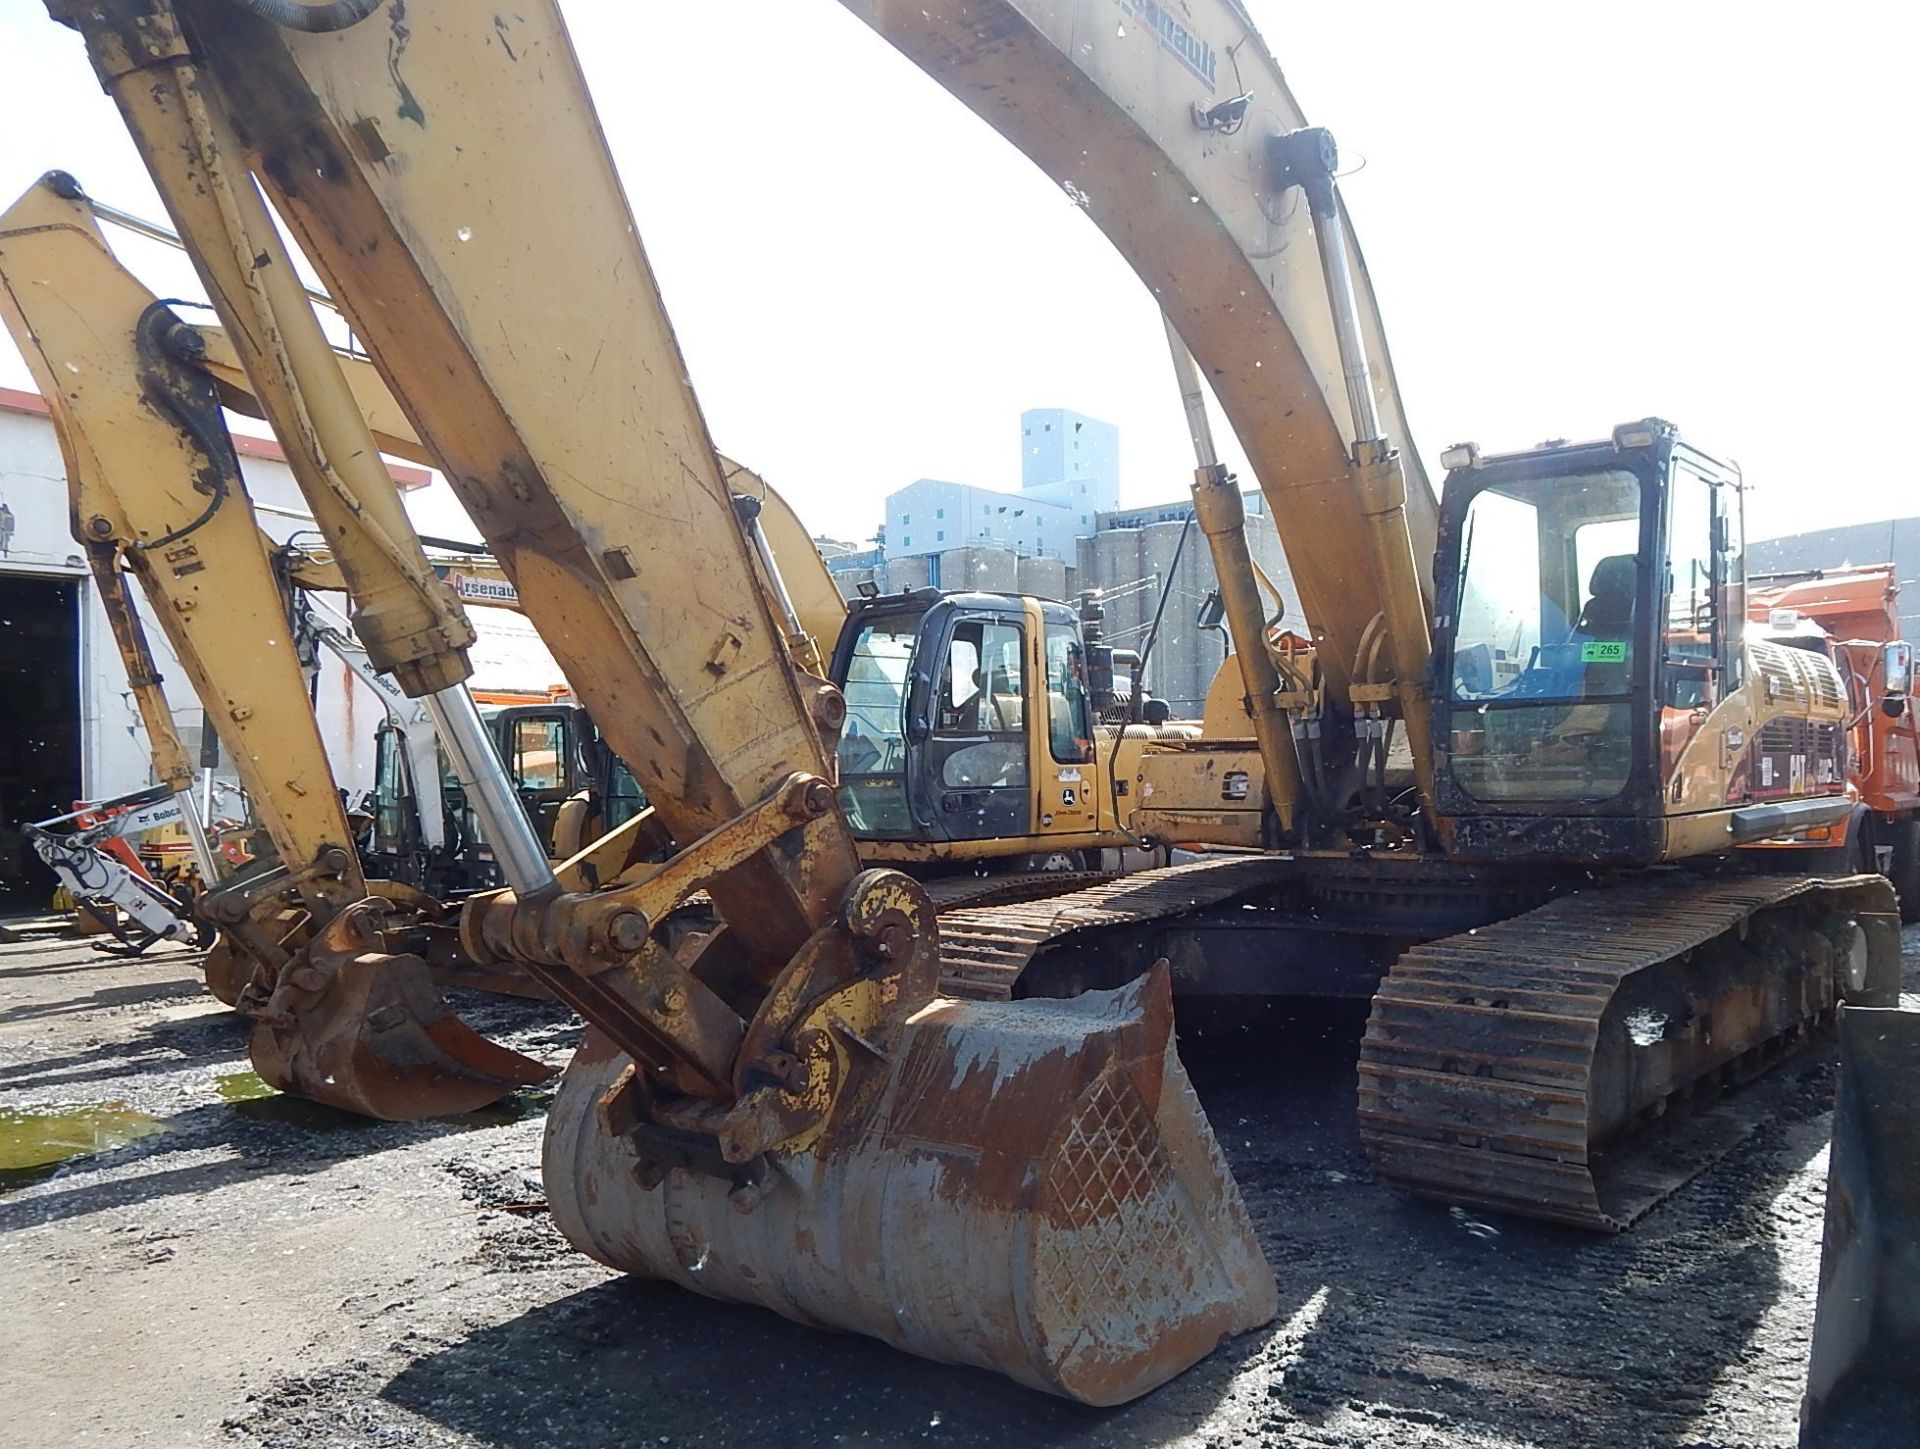 CATERPILLAR 330CL HYDRAULIC EXCAVATOR, APPROX. 12.100 HOURS ON METER, VIN CAT0330CLKDD01313